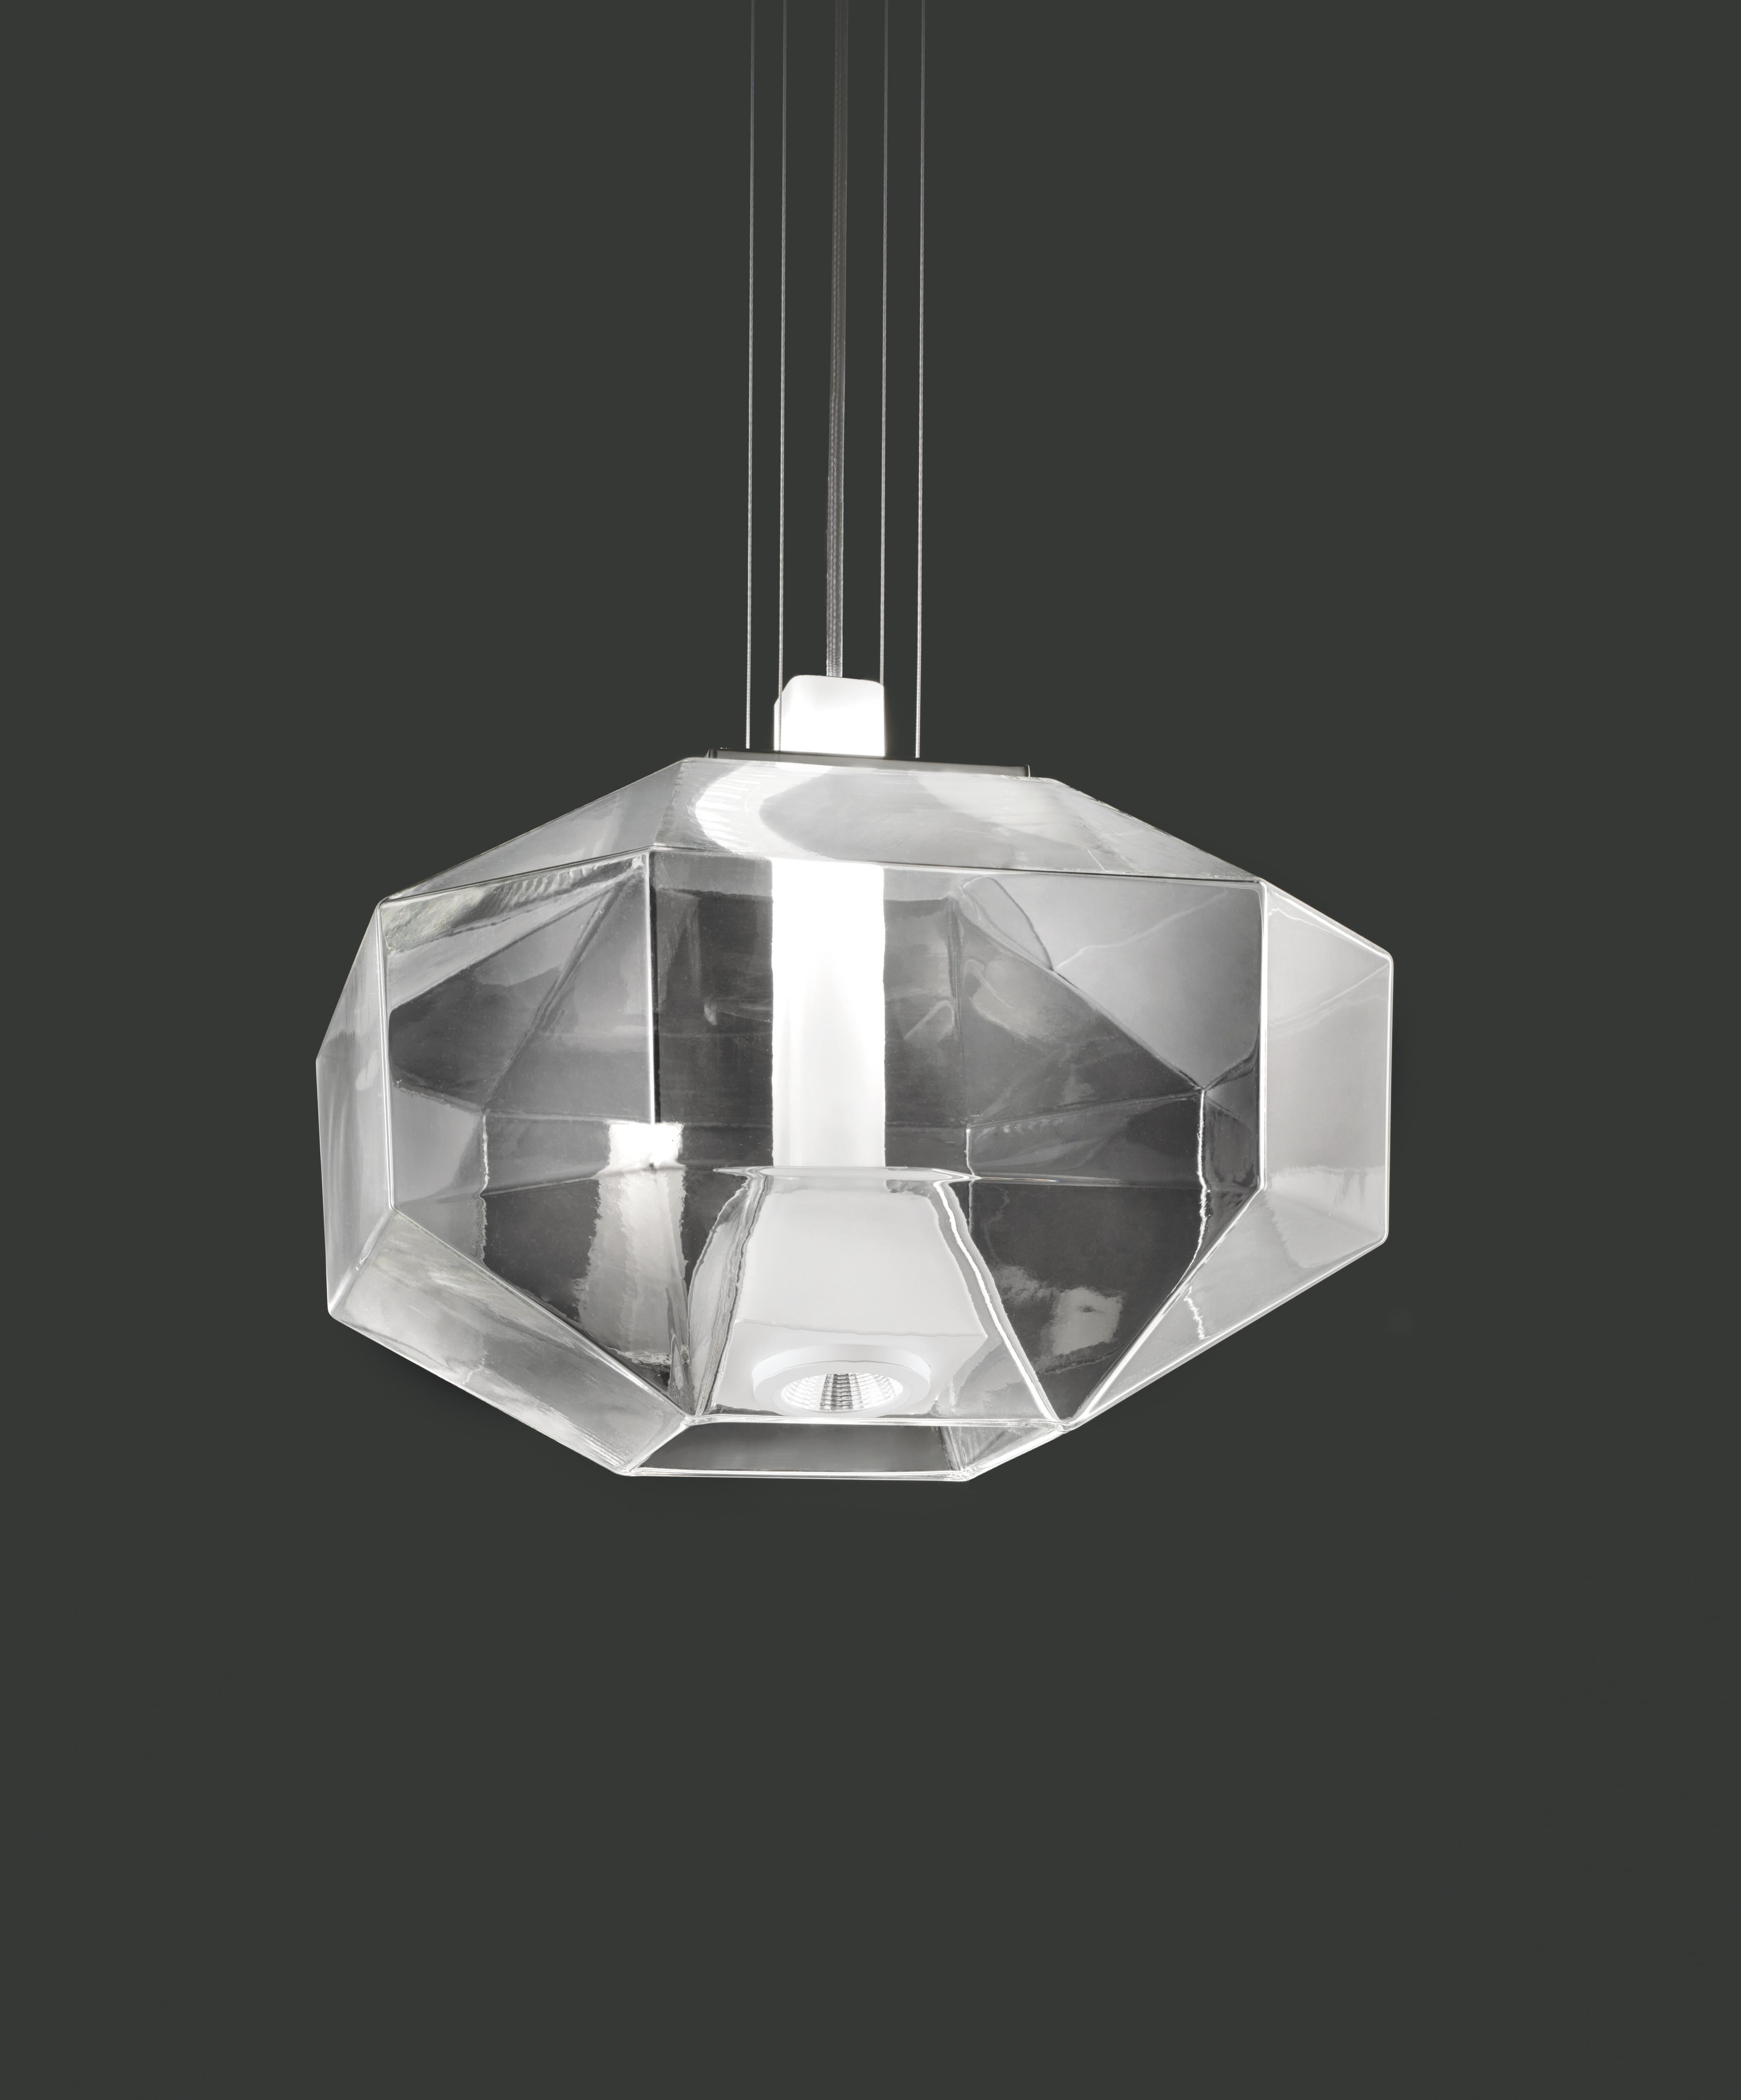 Italian Vistosi Stone SP LED Pendant Light in Crystal and White by Hangar Design Group For Sale